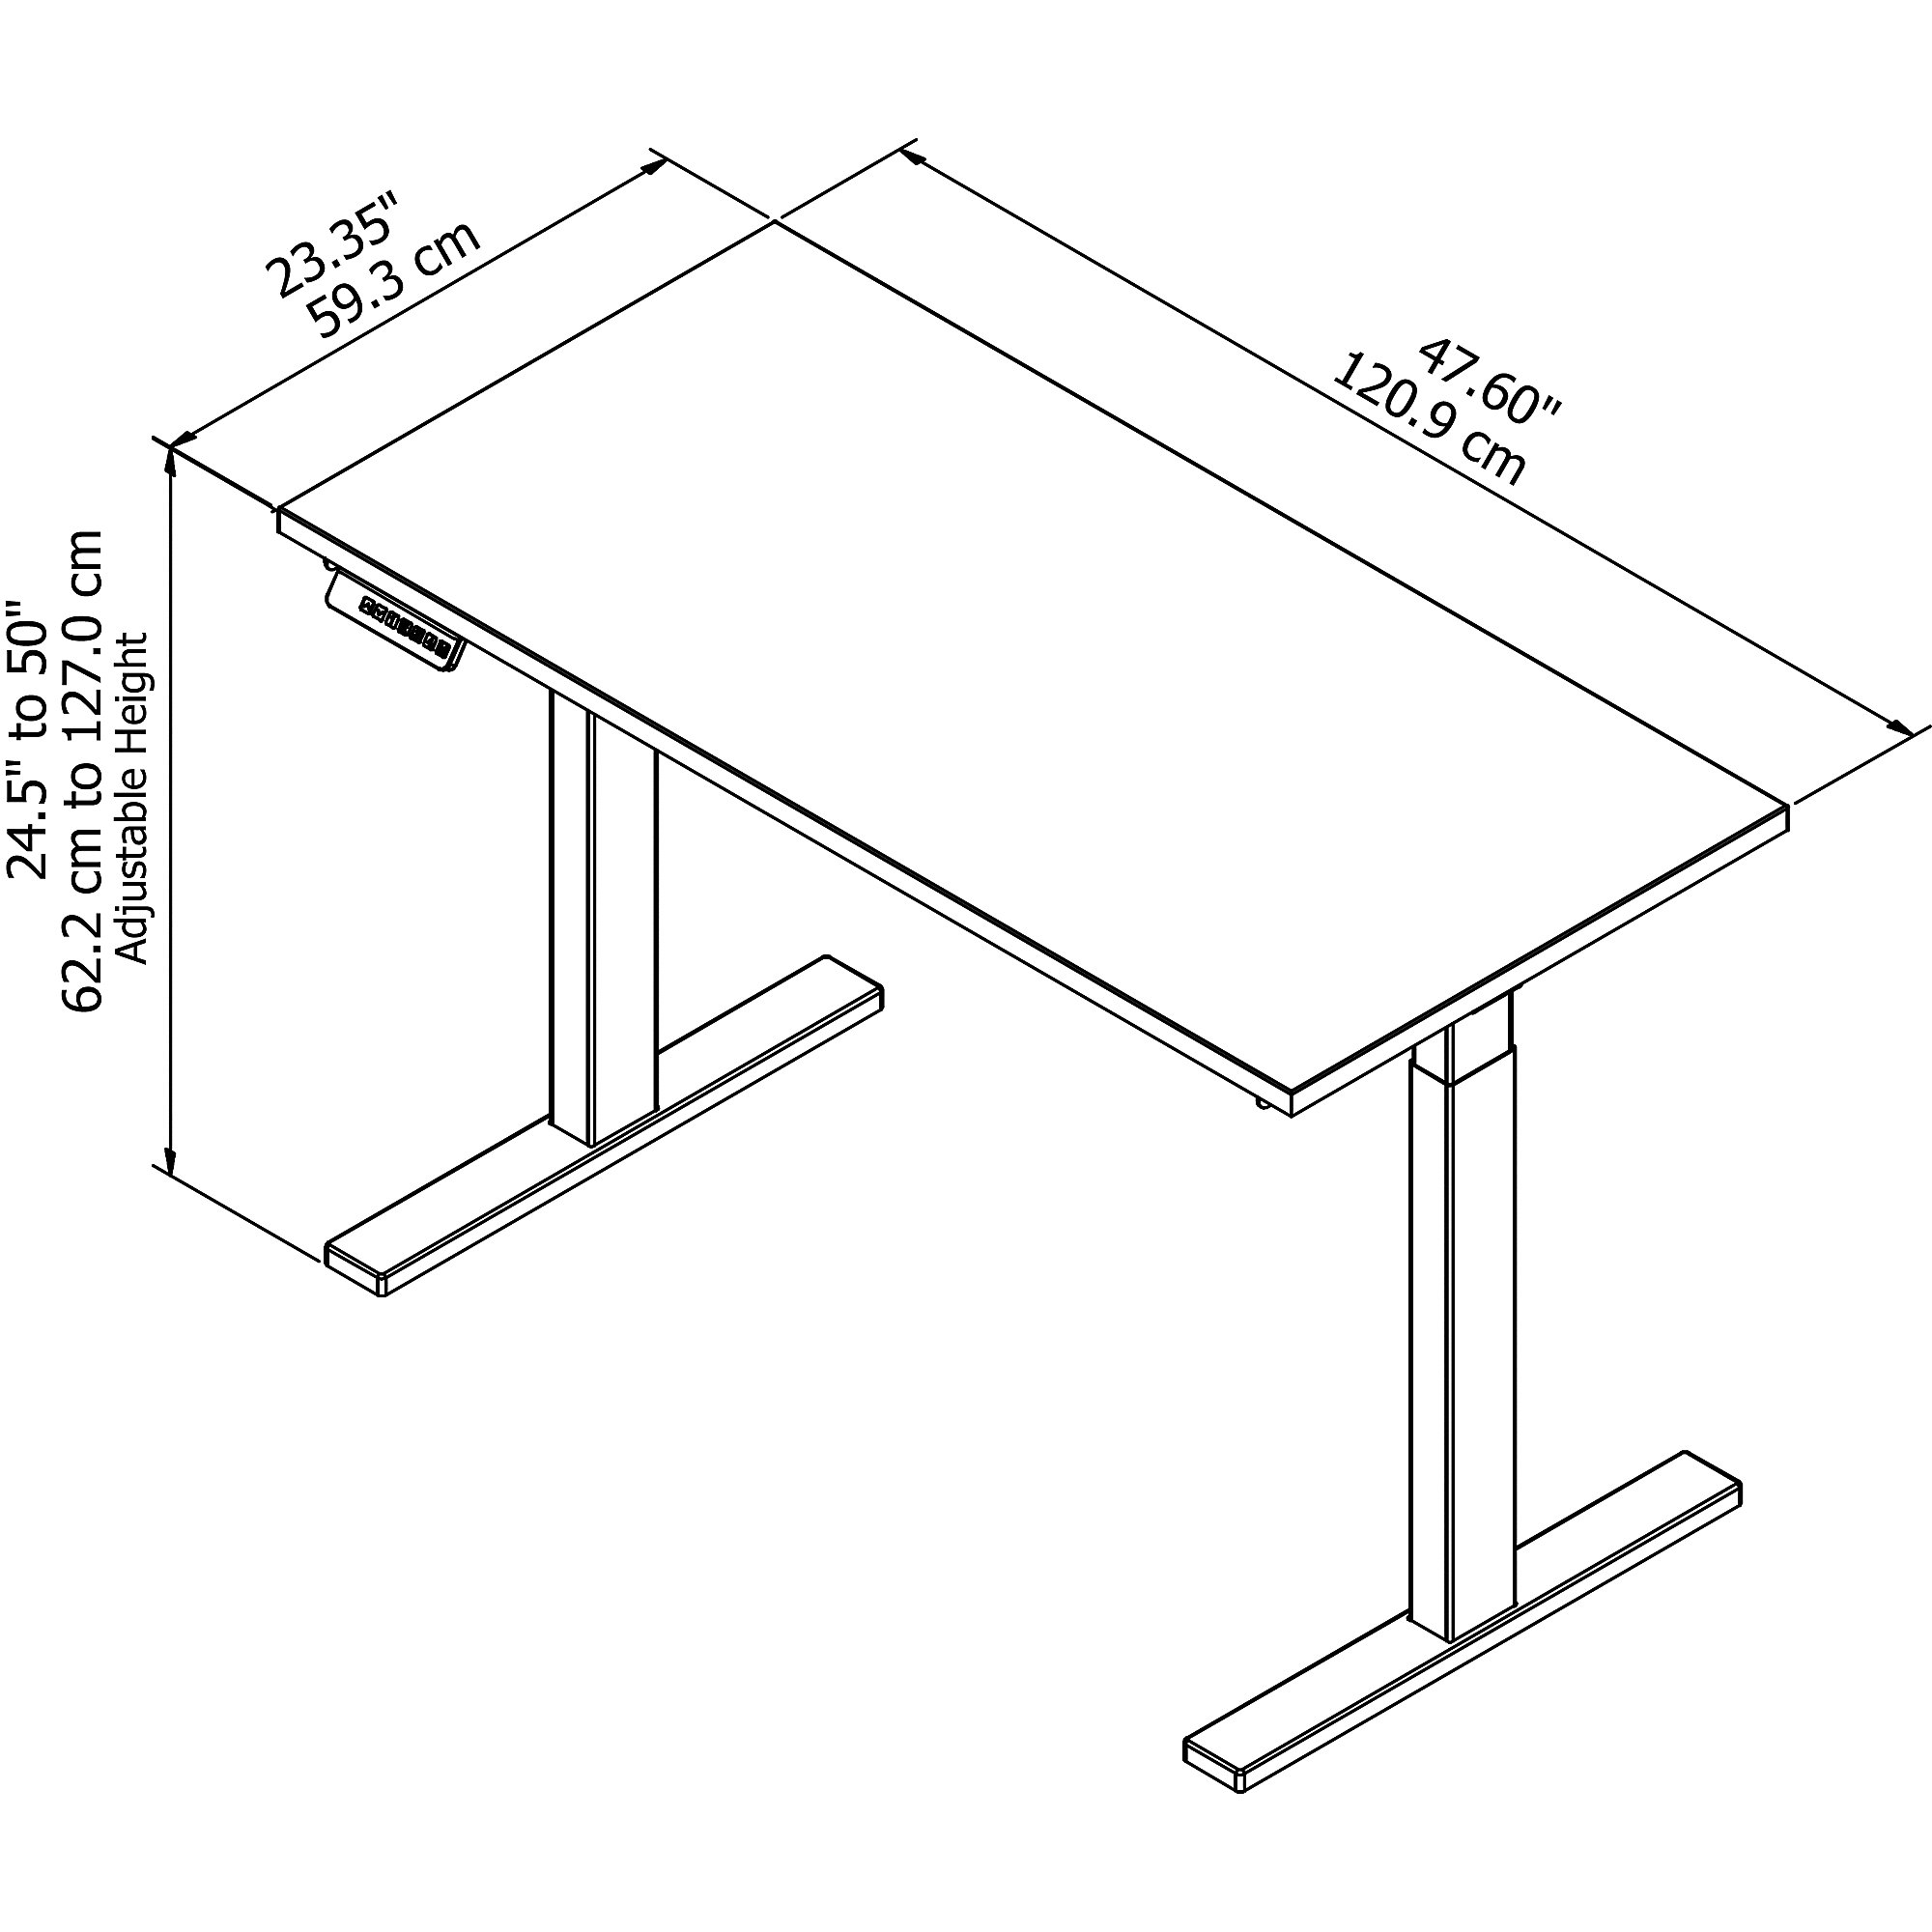 Sit stand desk home office layout 1